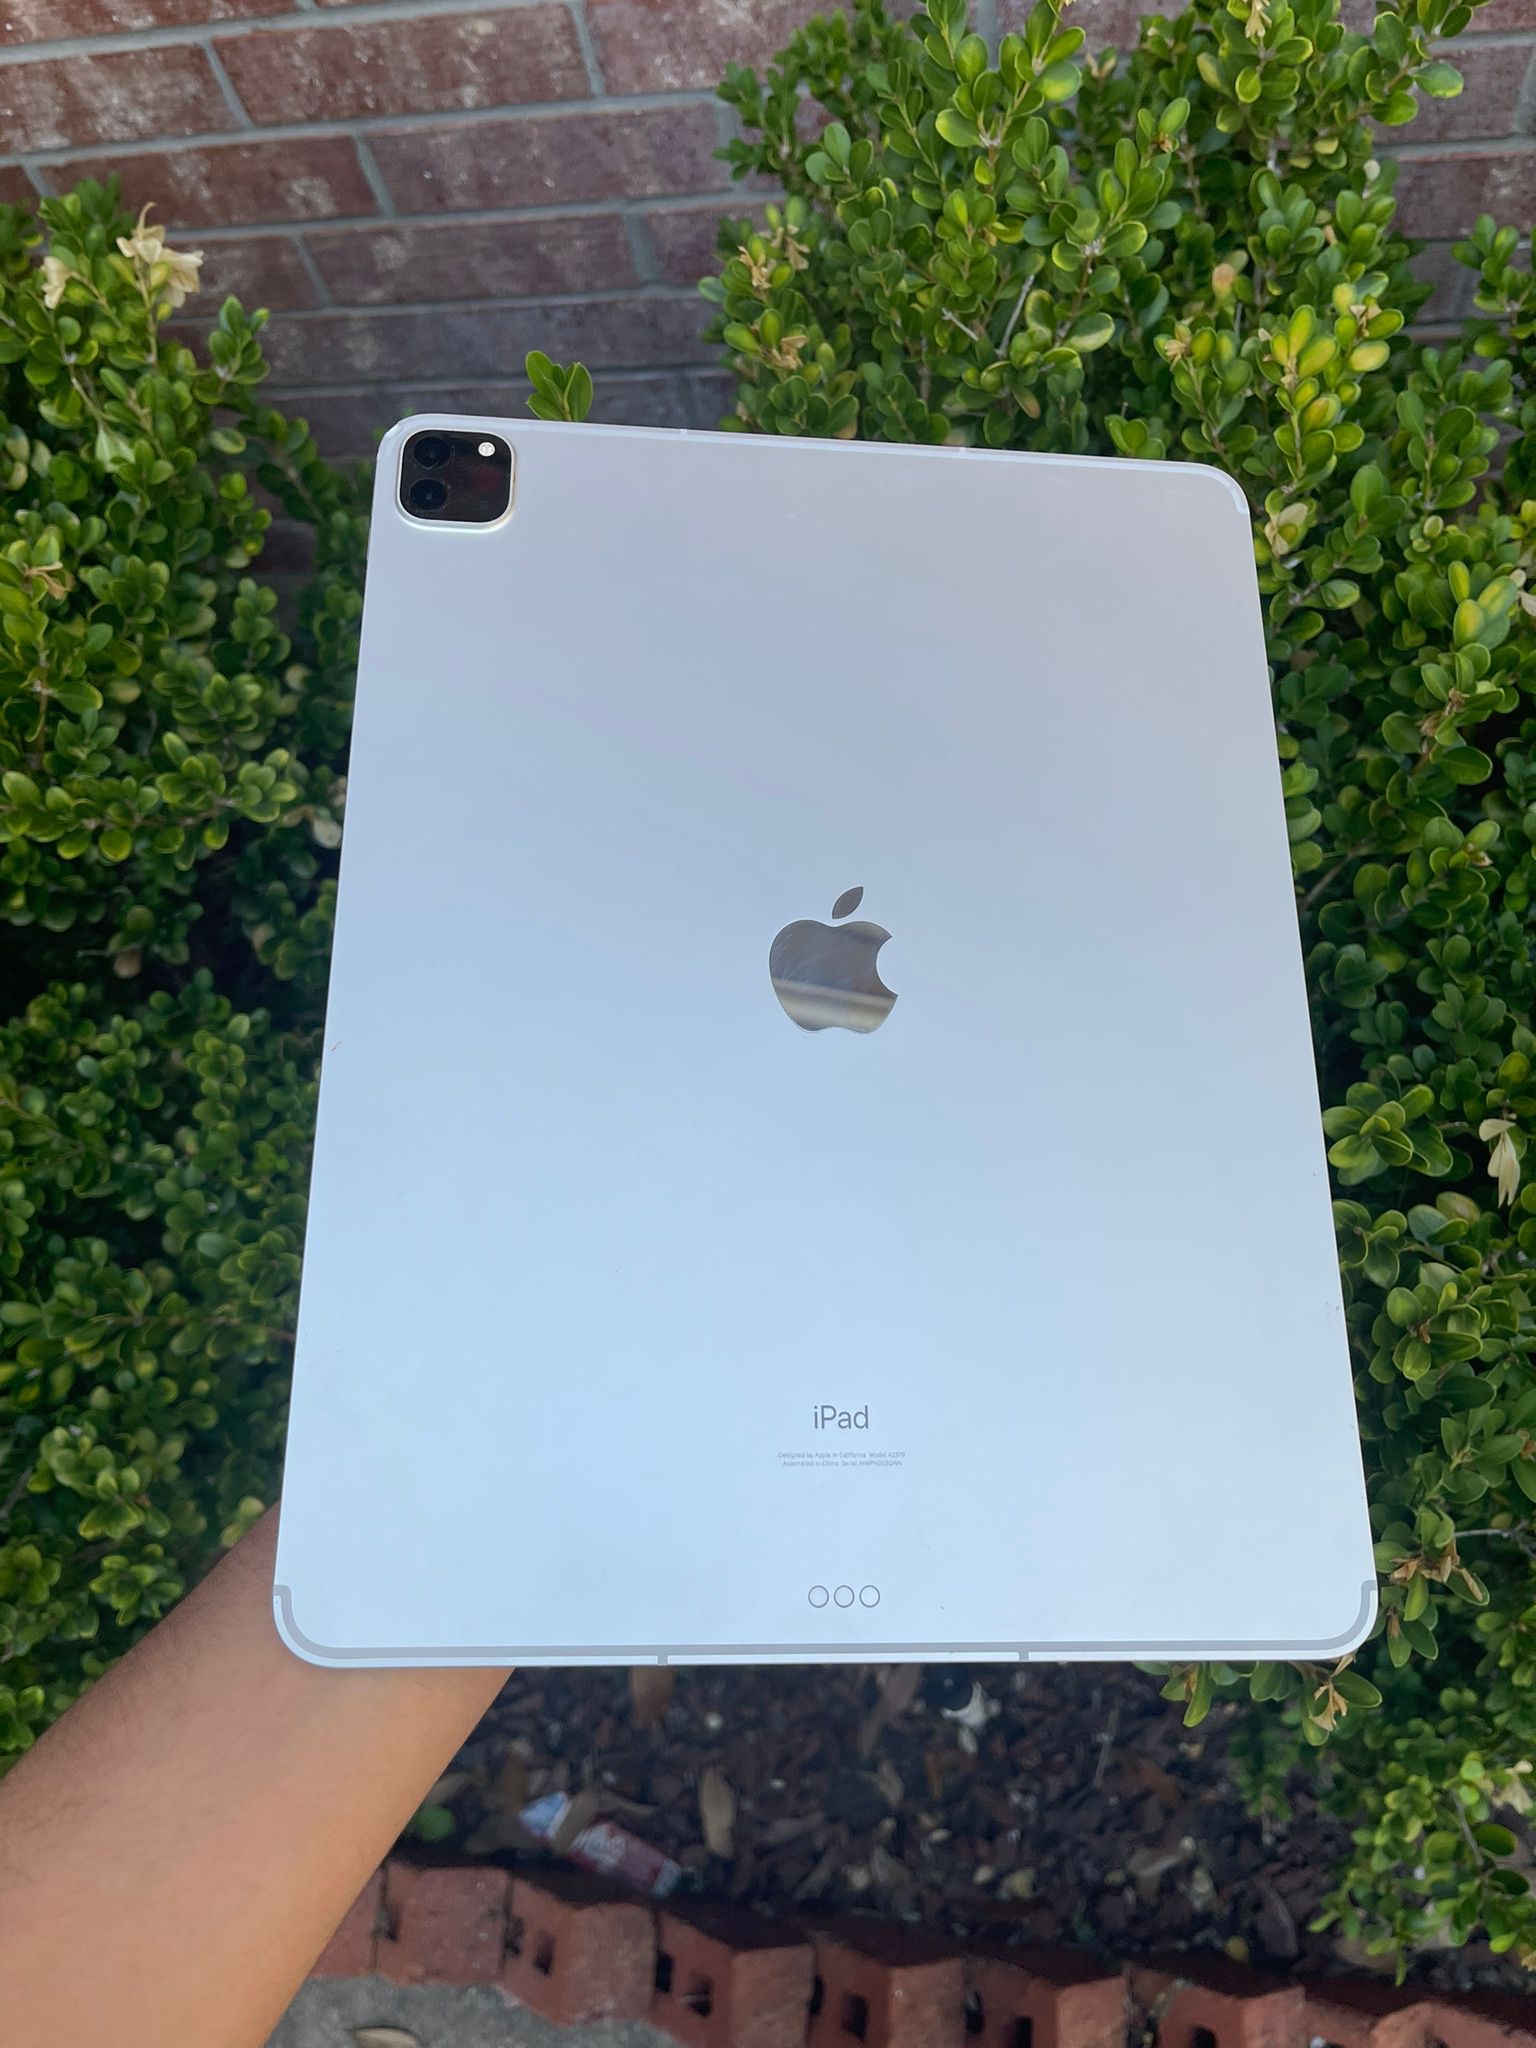 iPad pro 12.9" (5th gen) M1 chip_256G silver Wifi+Cellular  Big Apple iPad Pro 12.9-inch (5th gen.) 256GB  excellent condition,  Silver color __year 2